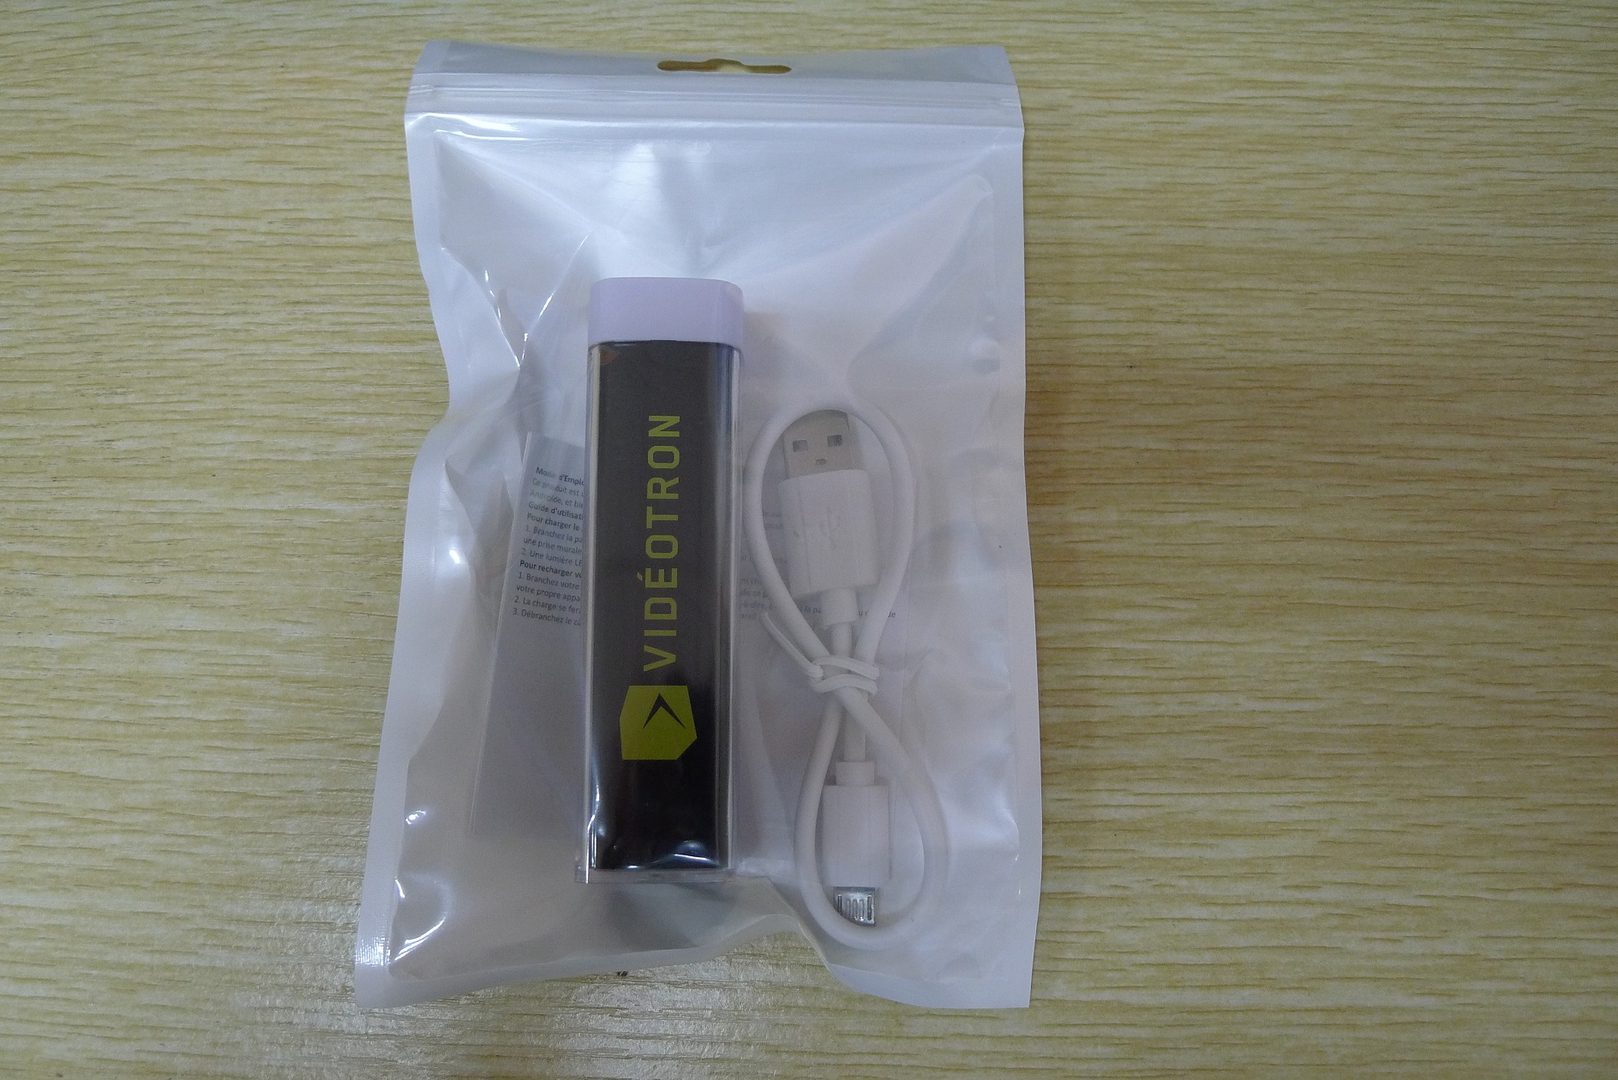 A Power Bank With a Chord Placed in a Plastic Bag